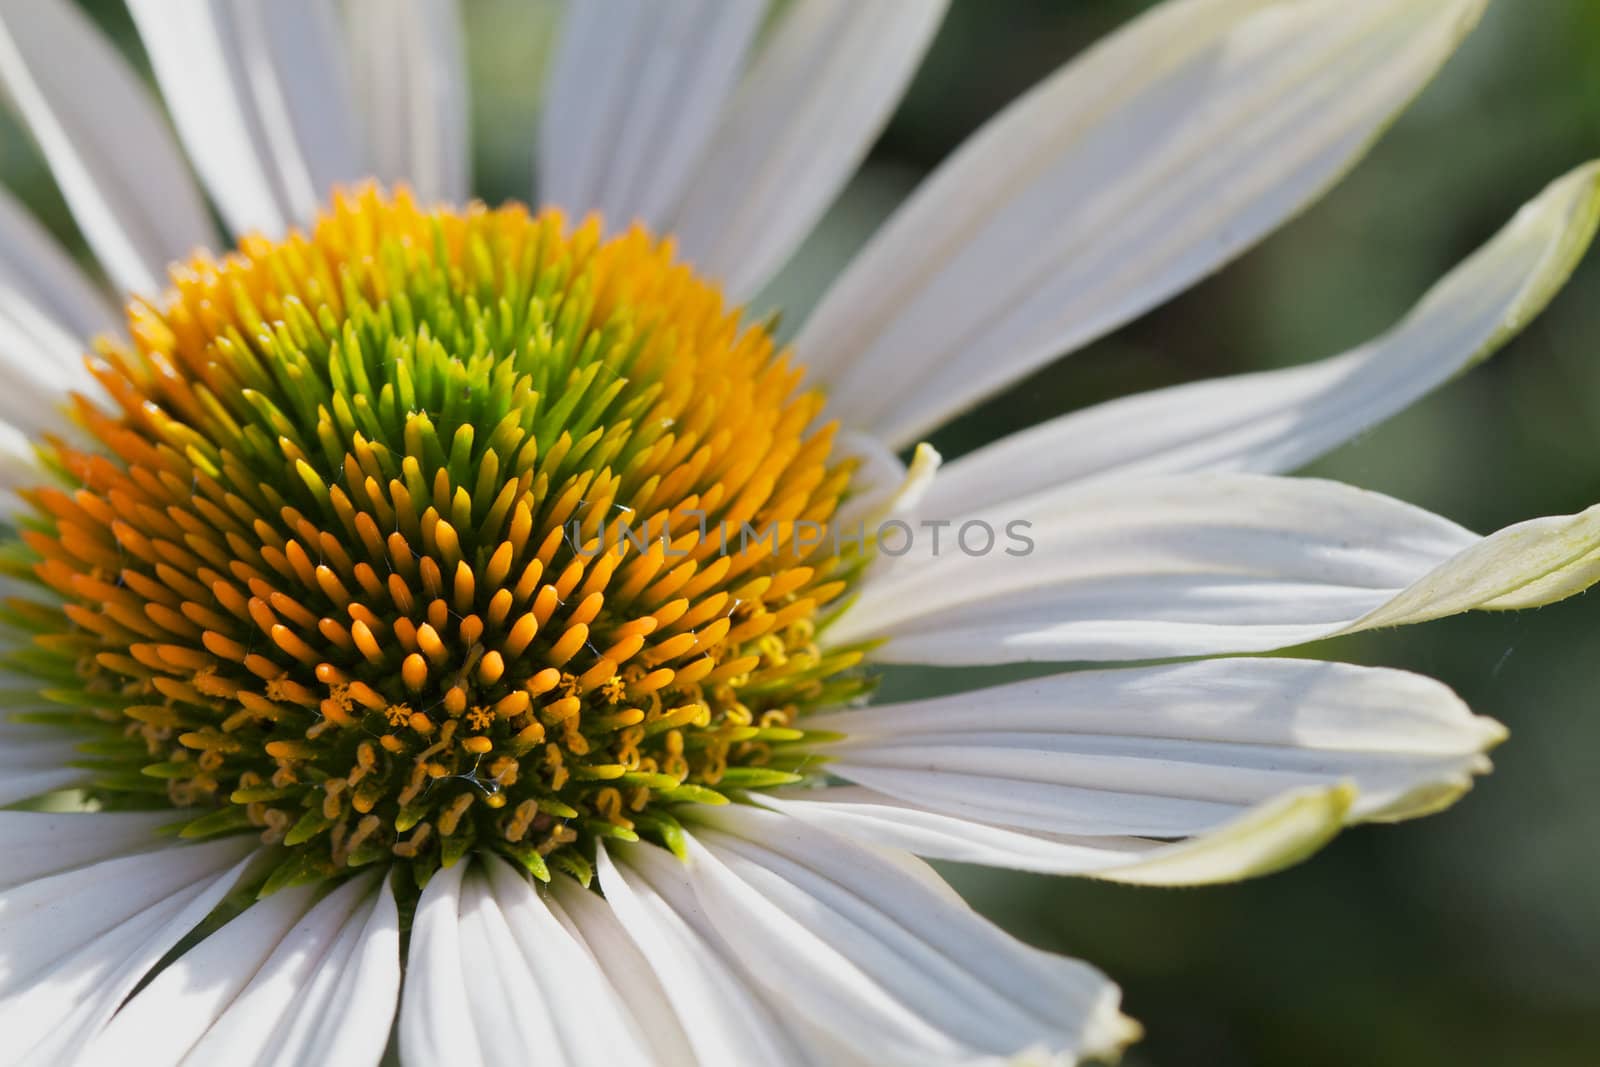 Macro of White daisy with large bunch of orange, yellow, and green stamen